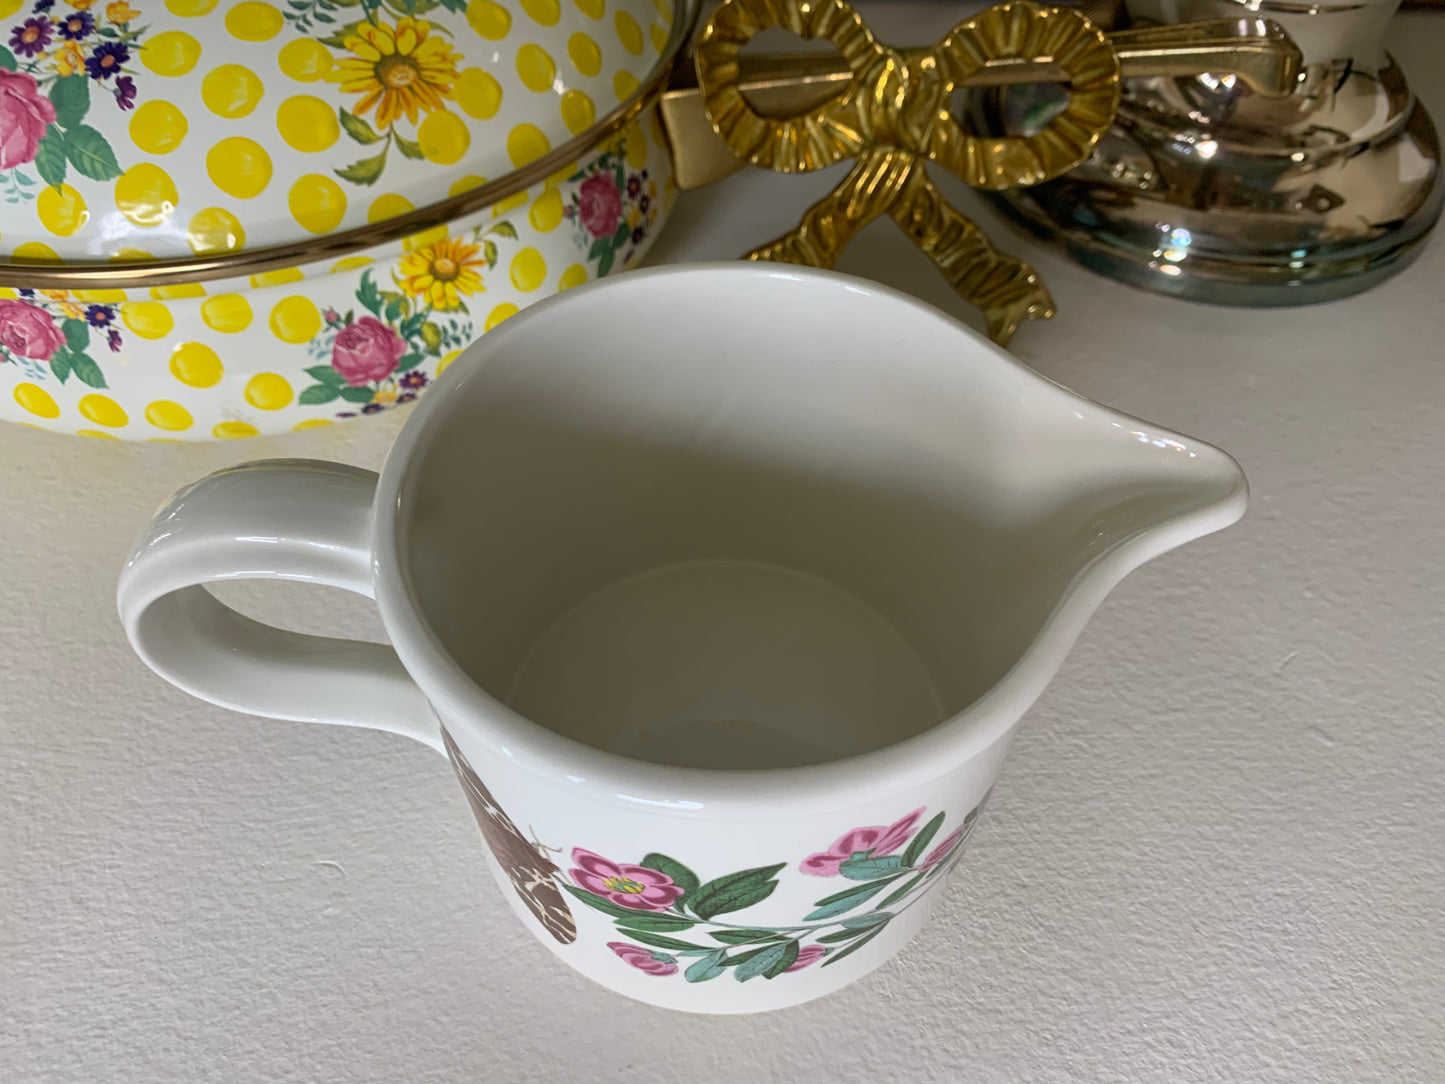 Portmeirion Botanic Garden small pitcher with flowers and butterflies - Excellent condition!